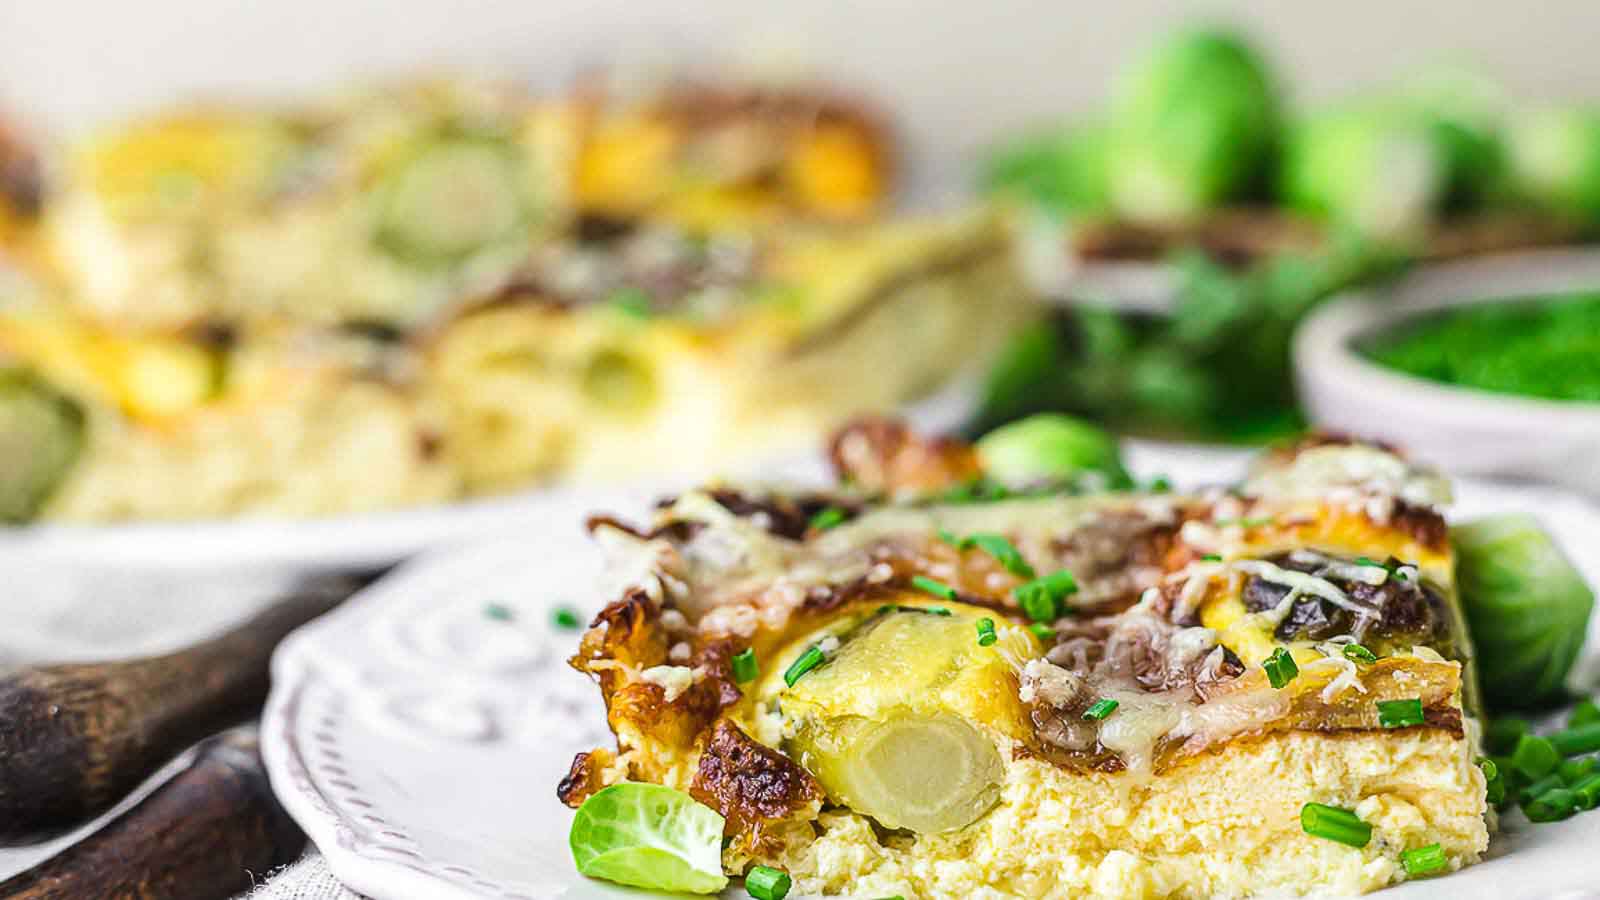 Cheesy Brussels Sprouts Bake. Photo credit: Low Carb – No Carb.